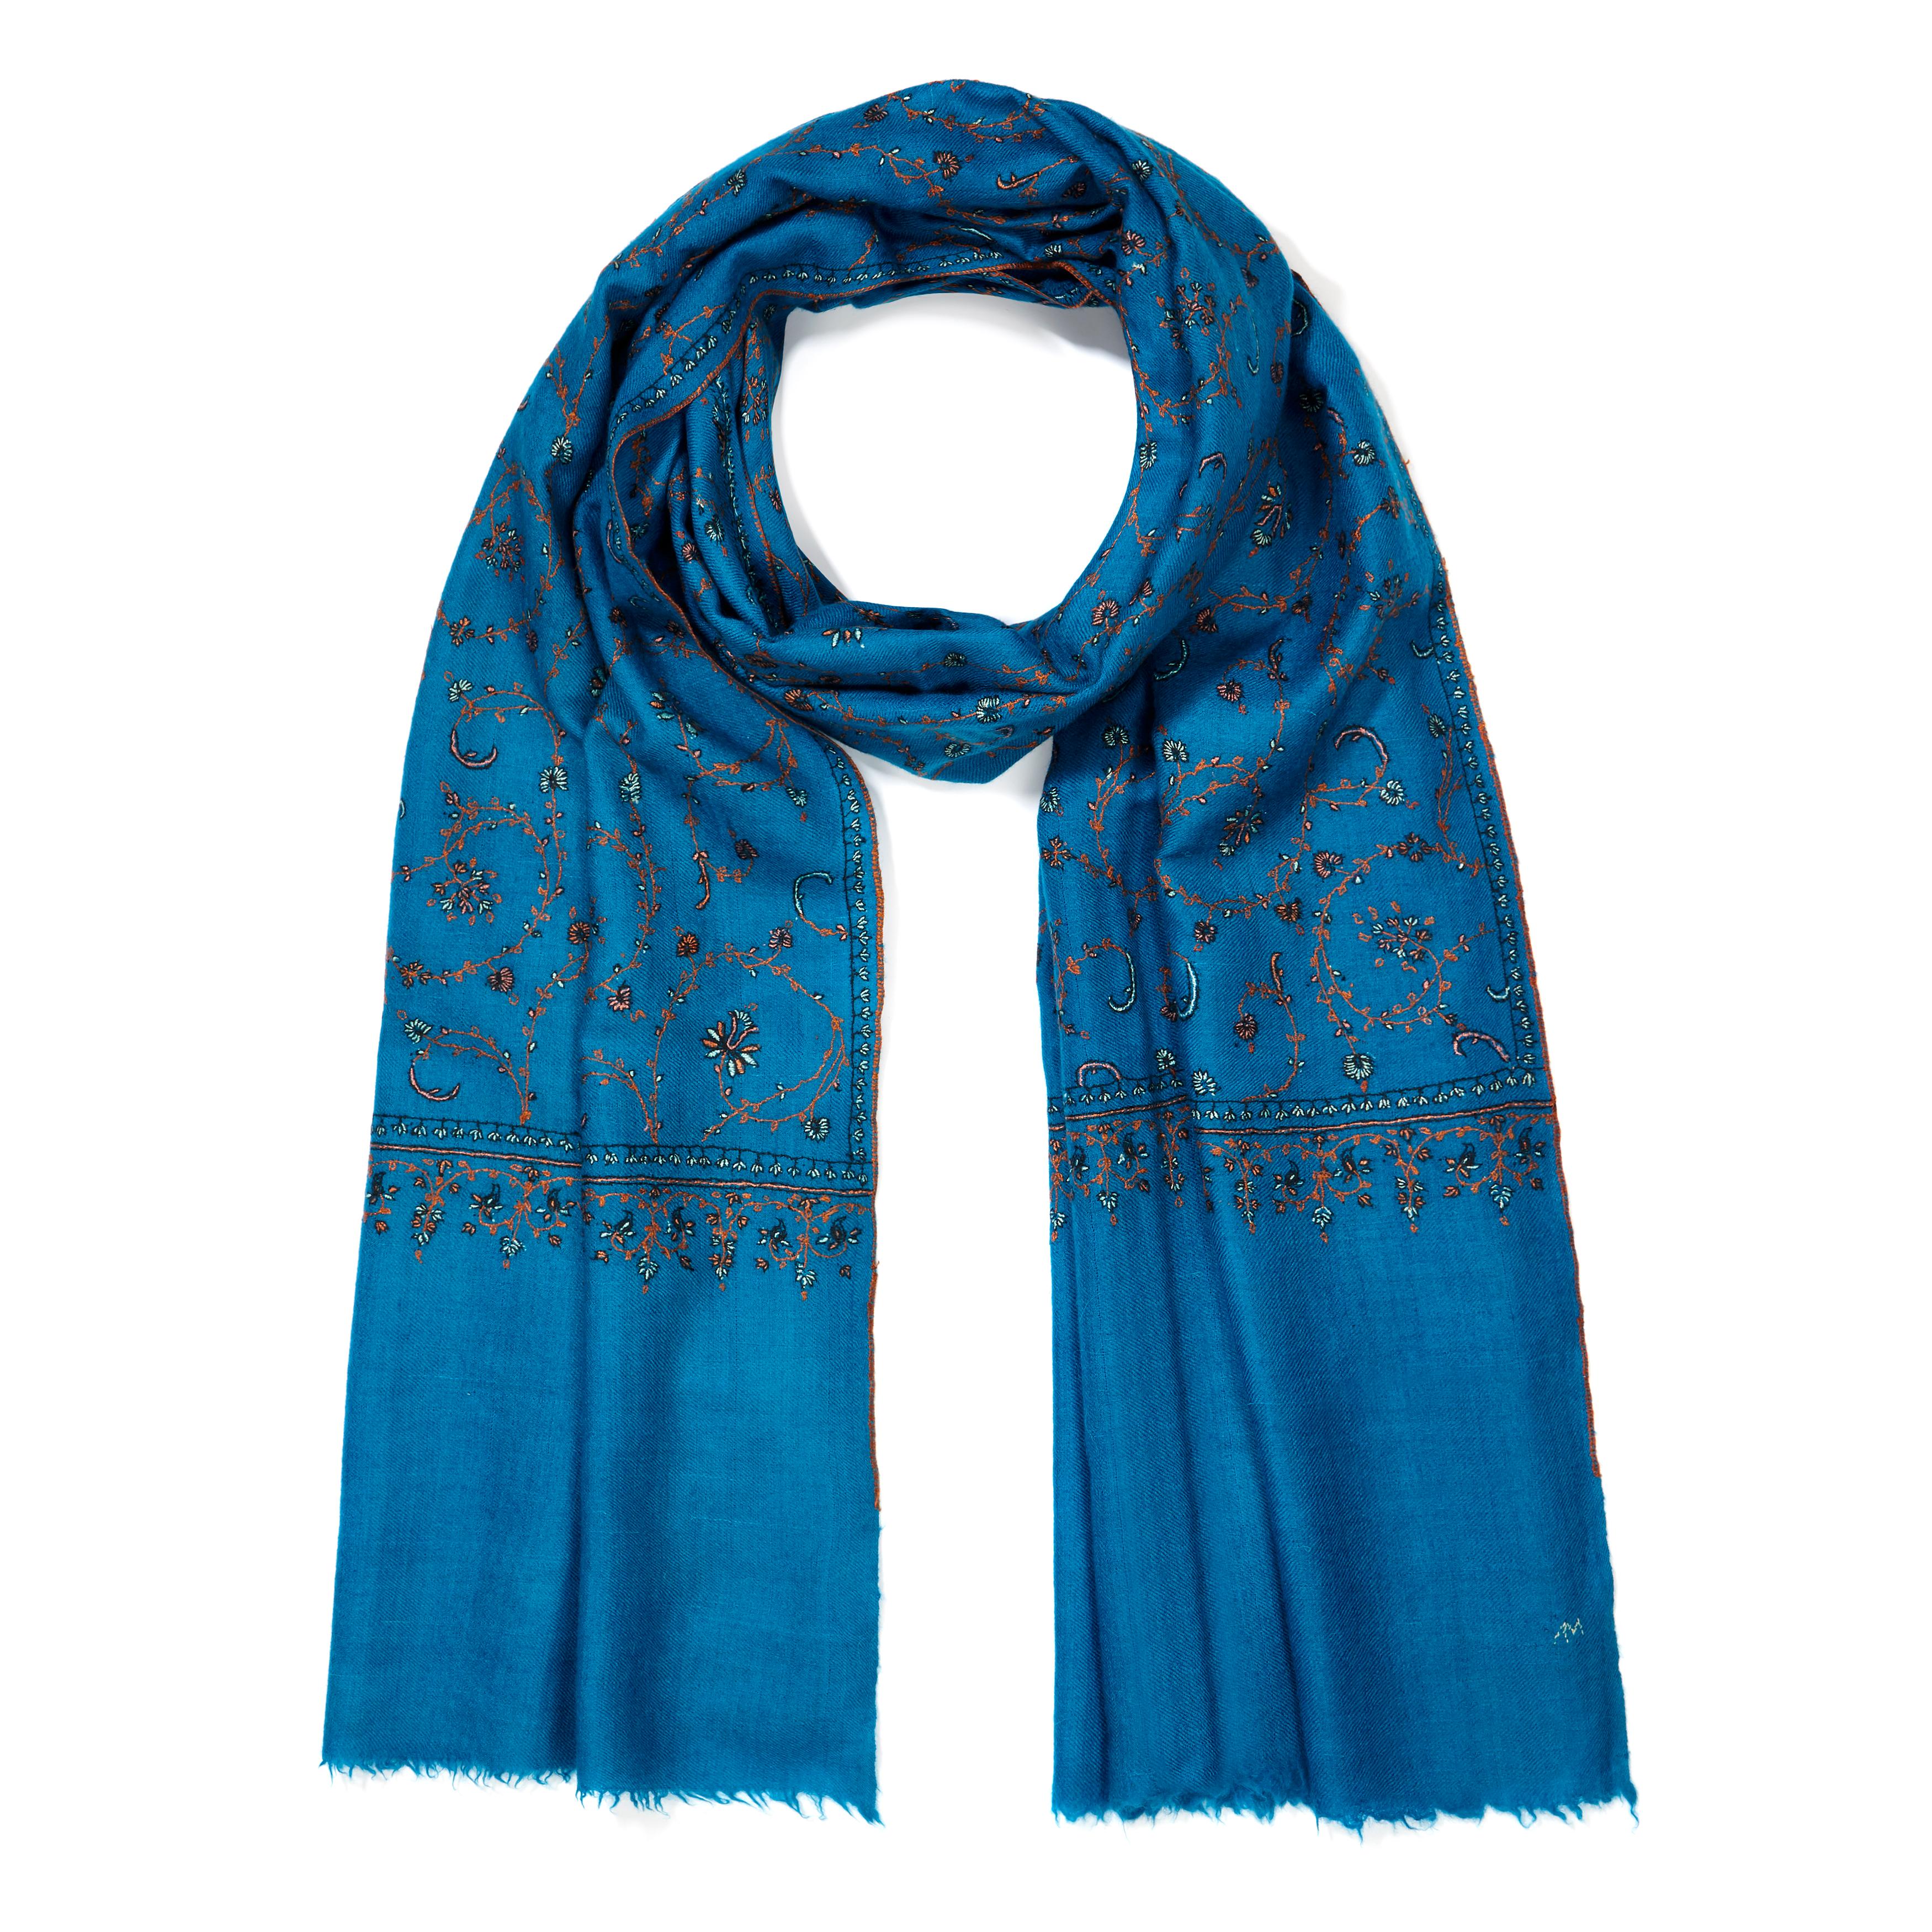 Women's or Men's Limited Edition Hand Embroidered Cashmere Scarf in Blue Made in Kashmir - Gift